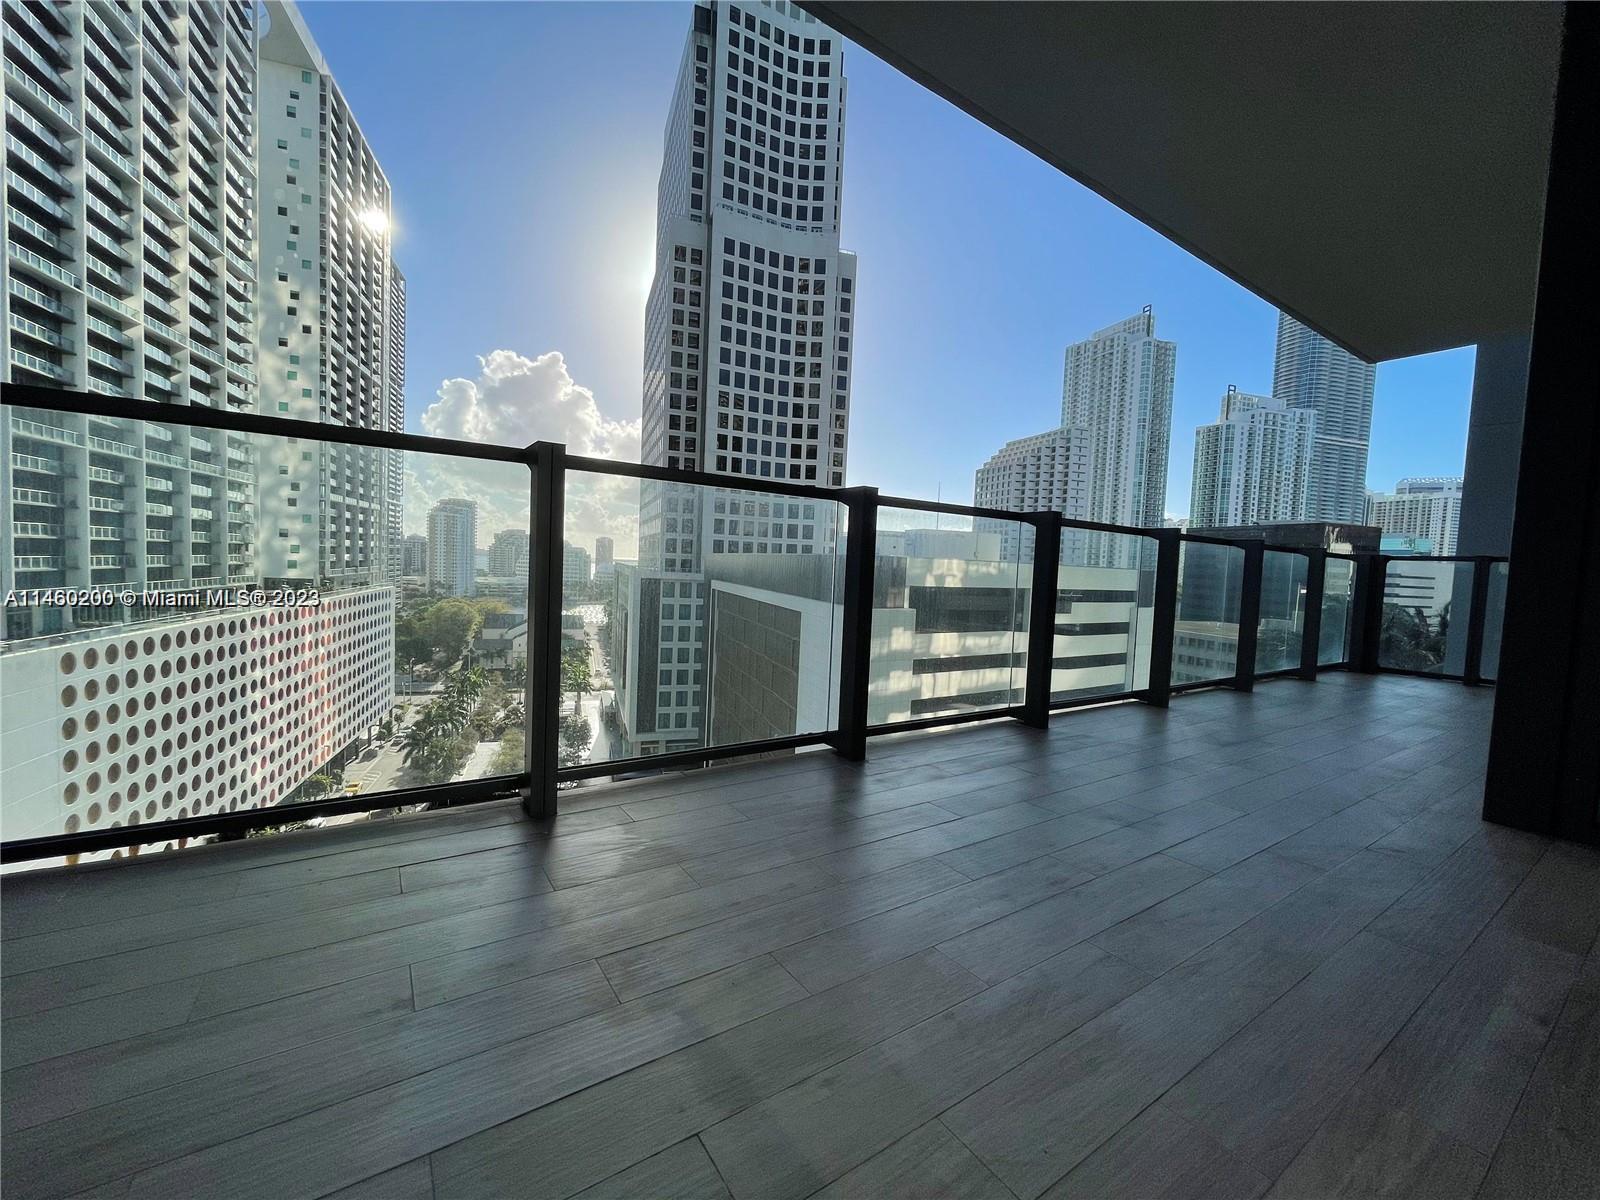 Rare 2 Beds with Den/Office and 2.5 Baths at Luxury Reach Brickell City Centre. Modern Italian kitchen cabinets, Premium Bosch appliances, wine cooler, marble floors, floor to ceiling windows to enjoy the amazing views. Wonderful condo with amazing views of the Miami River. Enjoy 5 star hotel amenities. Walking distance to best restaurant and shopping stores. Amenities include: 24hr concierge service, 2 pools, Jacuzzi, spa, steam room, social room, fitness and children's center. Live the Brickell lifestyle at its fullest!